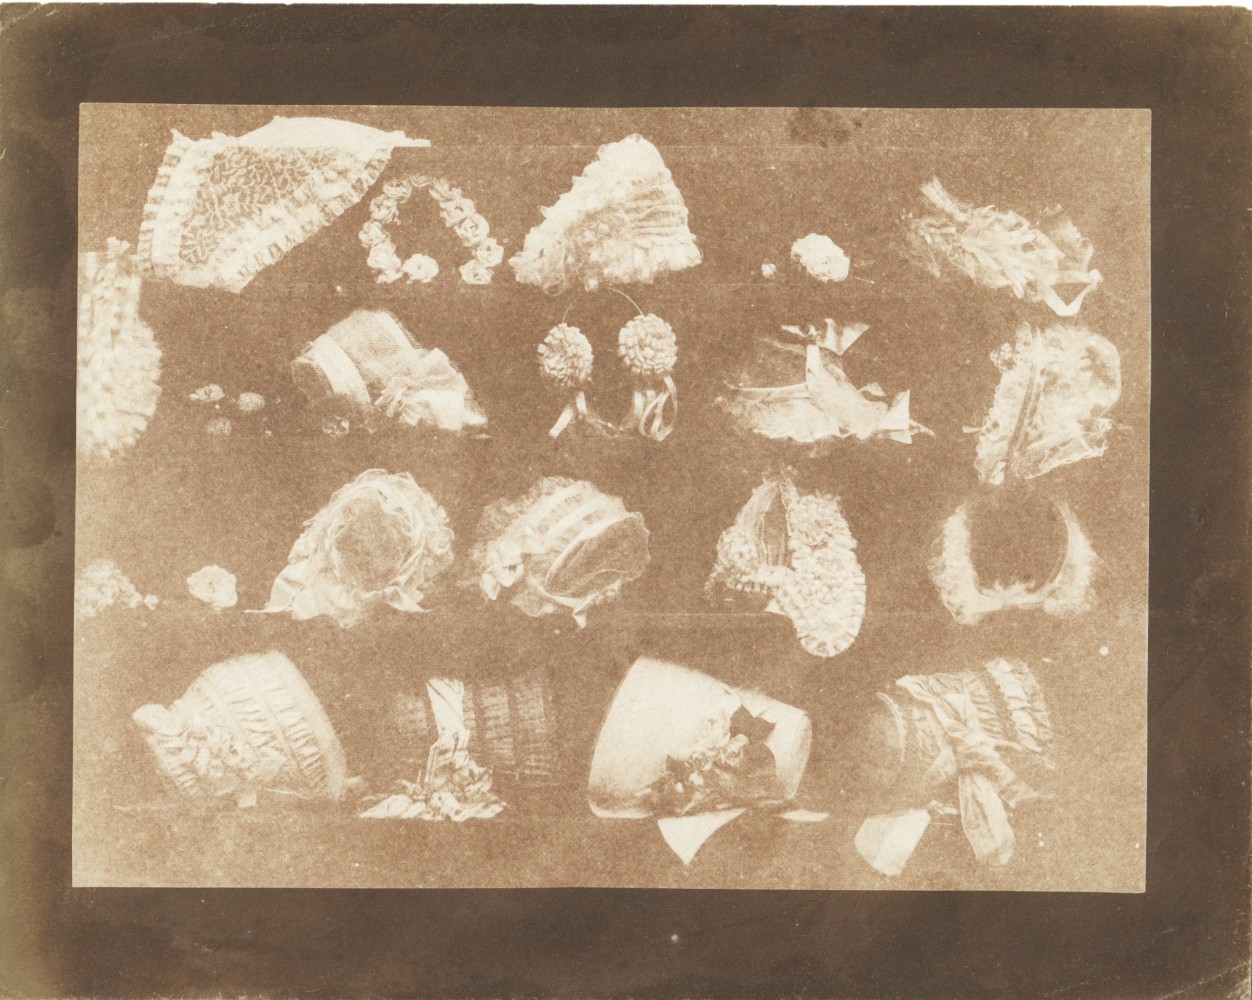 William Henry Fox TALBOT (English, 1800-1877) The milliner's window, circa 1844 Salt print from a calotype negative 14.4 x 19.6 cm on 18.3 x 22.9 cm paper